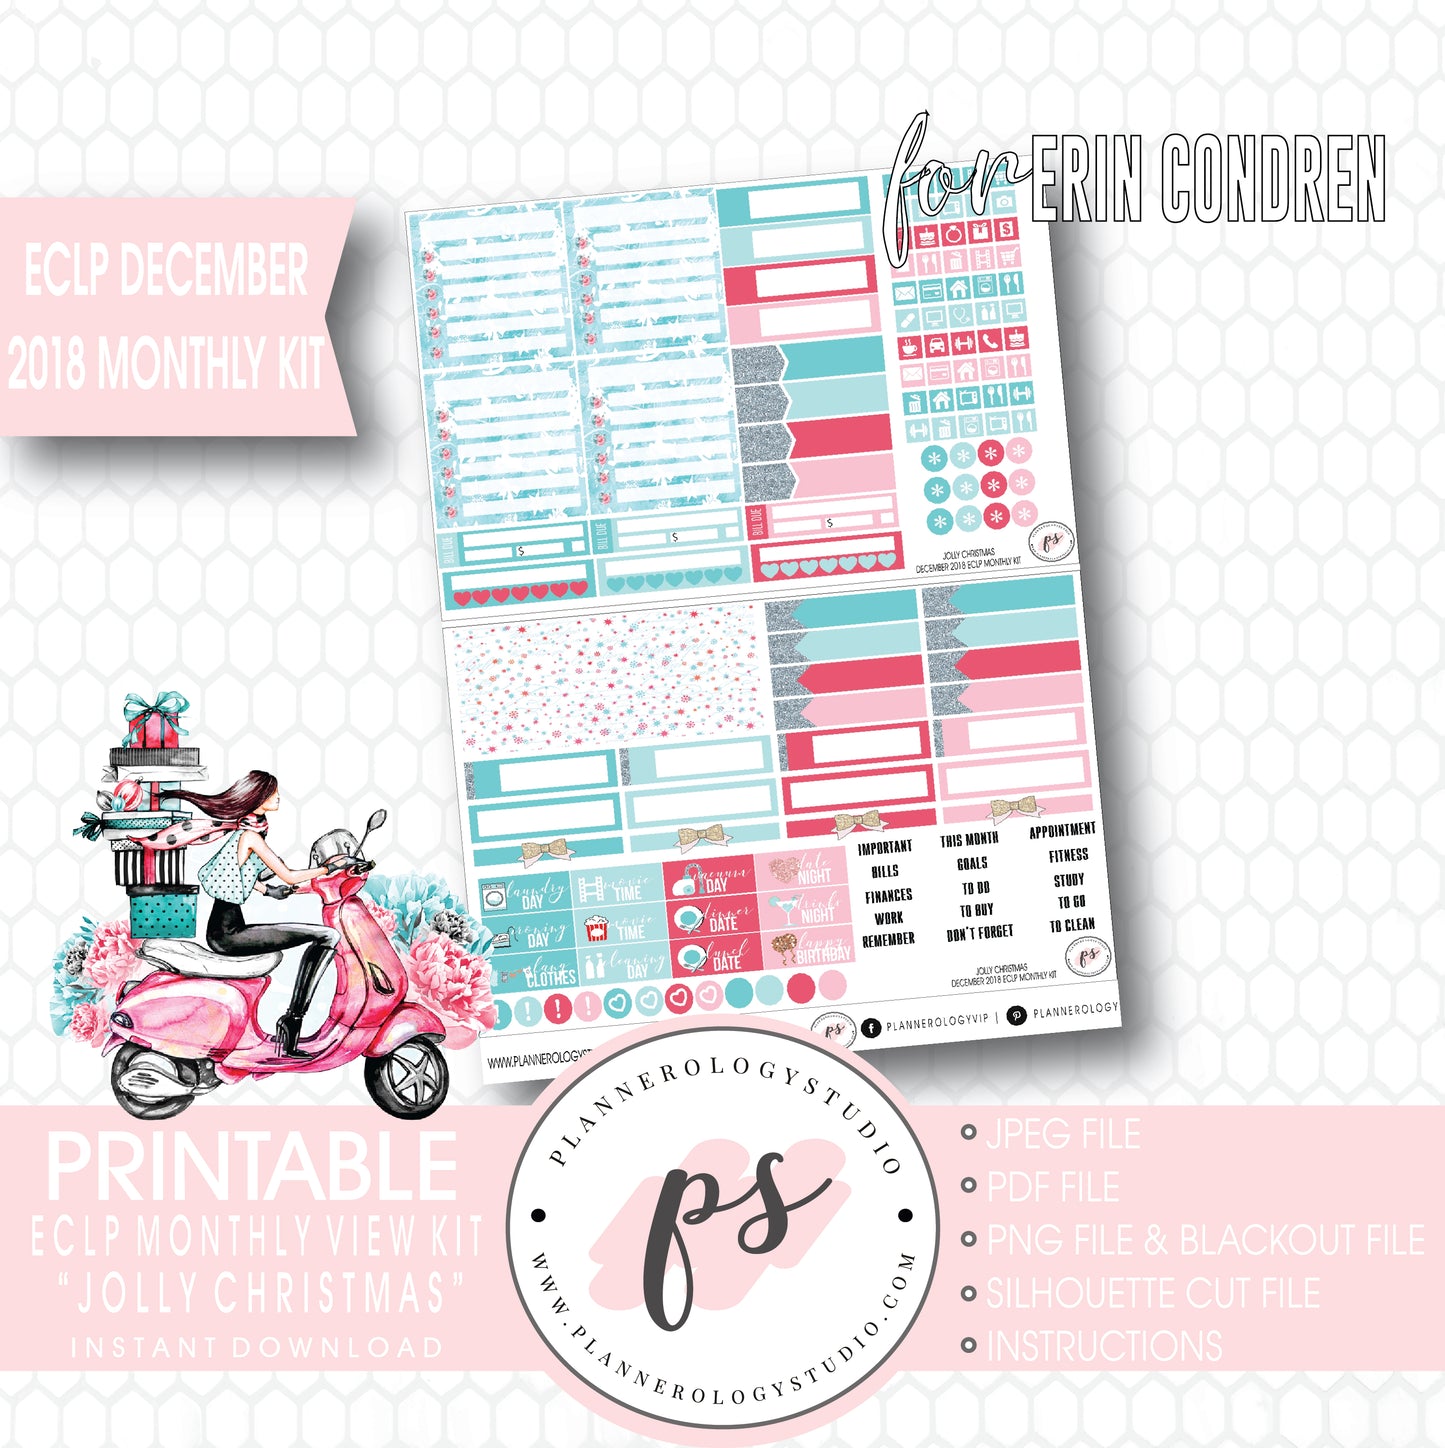 Jolly Christmas December 2018 Monthly View Kit Digital Printable Planner Stickers (for use with Erin Condren) - Plannerologystudio